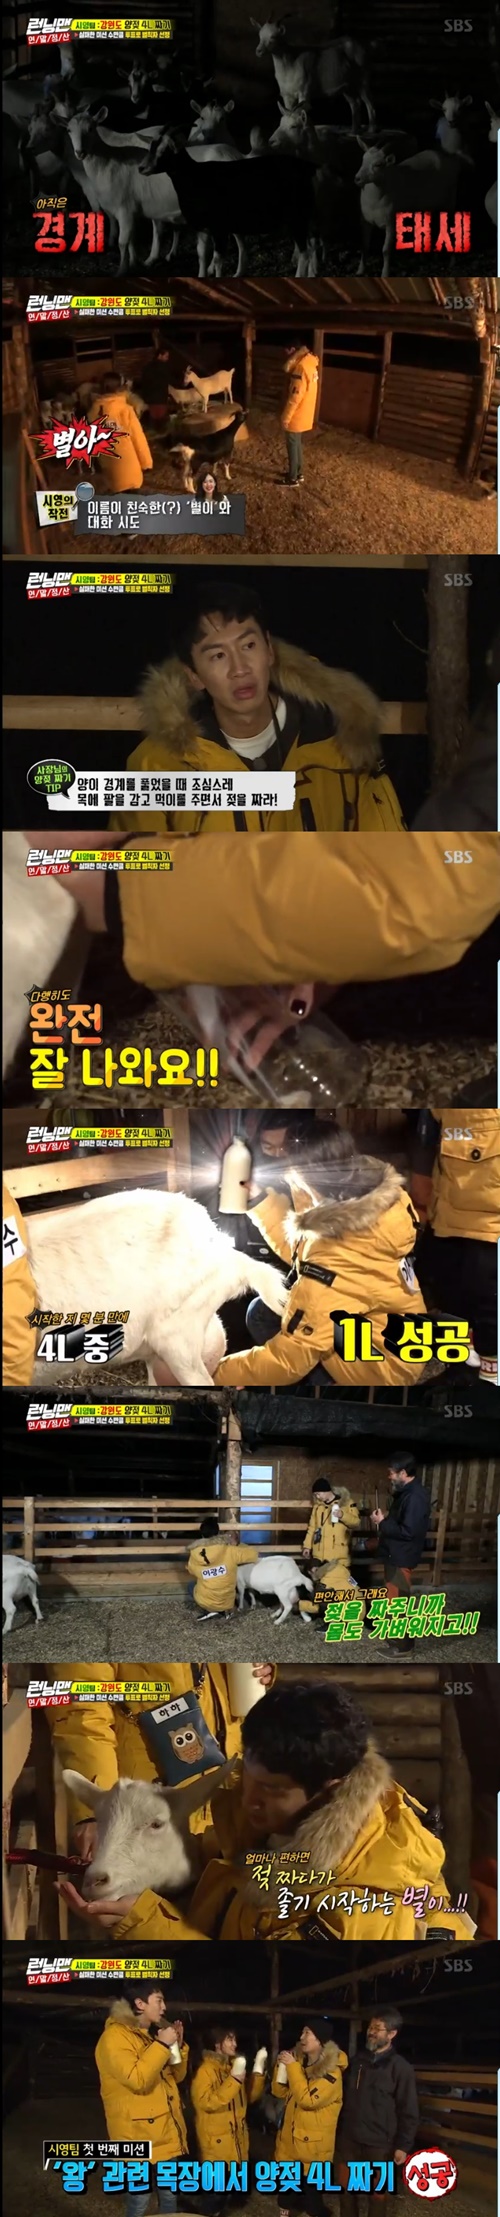 The Running Man Lee Si-young team succeeded in milking.Lee Si-young, Lee Kwang-soo and Haha challenged to squeeze 4L of sheeps milk in the SBS entertainment program Running Man, which was broadcast on the afternoon of the 16th.The three men approached the sheep carefully, and the sheep were wary; the rancher suddenly advised them to walk the Motörheadlock as they were fed and gradually becoming friendly.In the meantime, it was an explanation that we should milk.Lee Kwang-soo fed and Lee Si-young milked Motörheadlock; Haha decided to soothe the sheep and arrange it after taking the bottle.After a failed run, he succeeded in milking 4L. The ranch owner said, If you milk them, they (the sheep) are light and good.